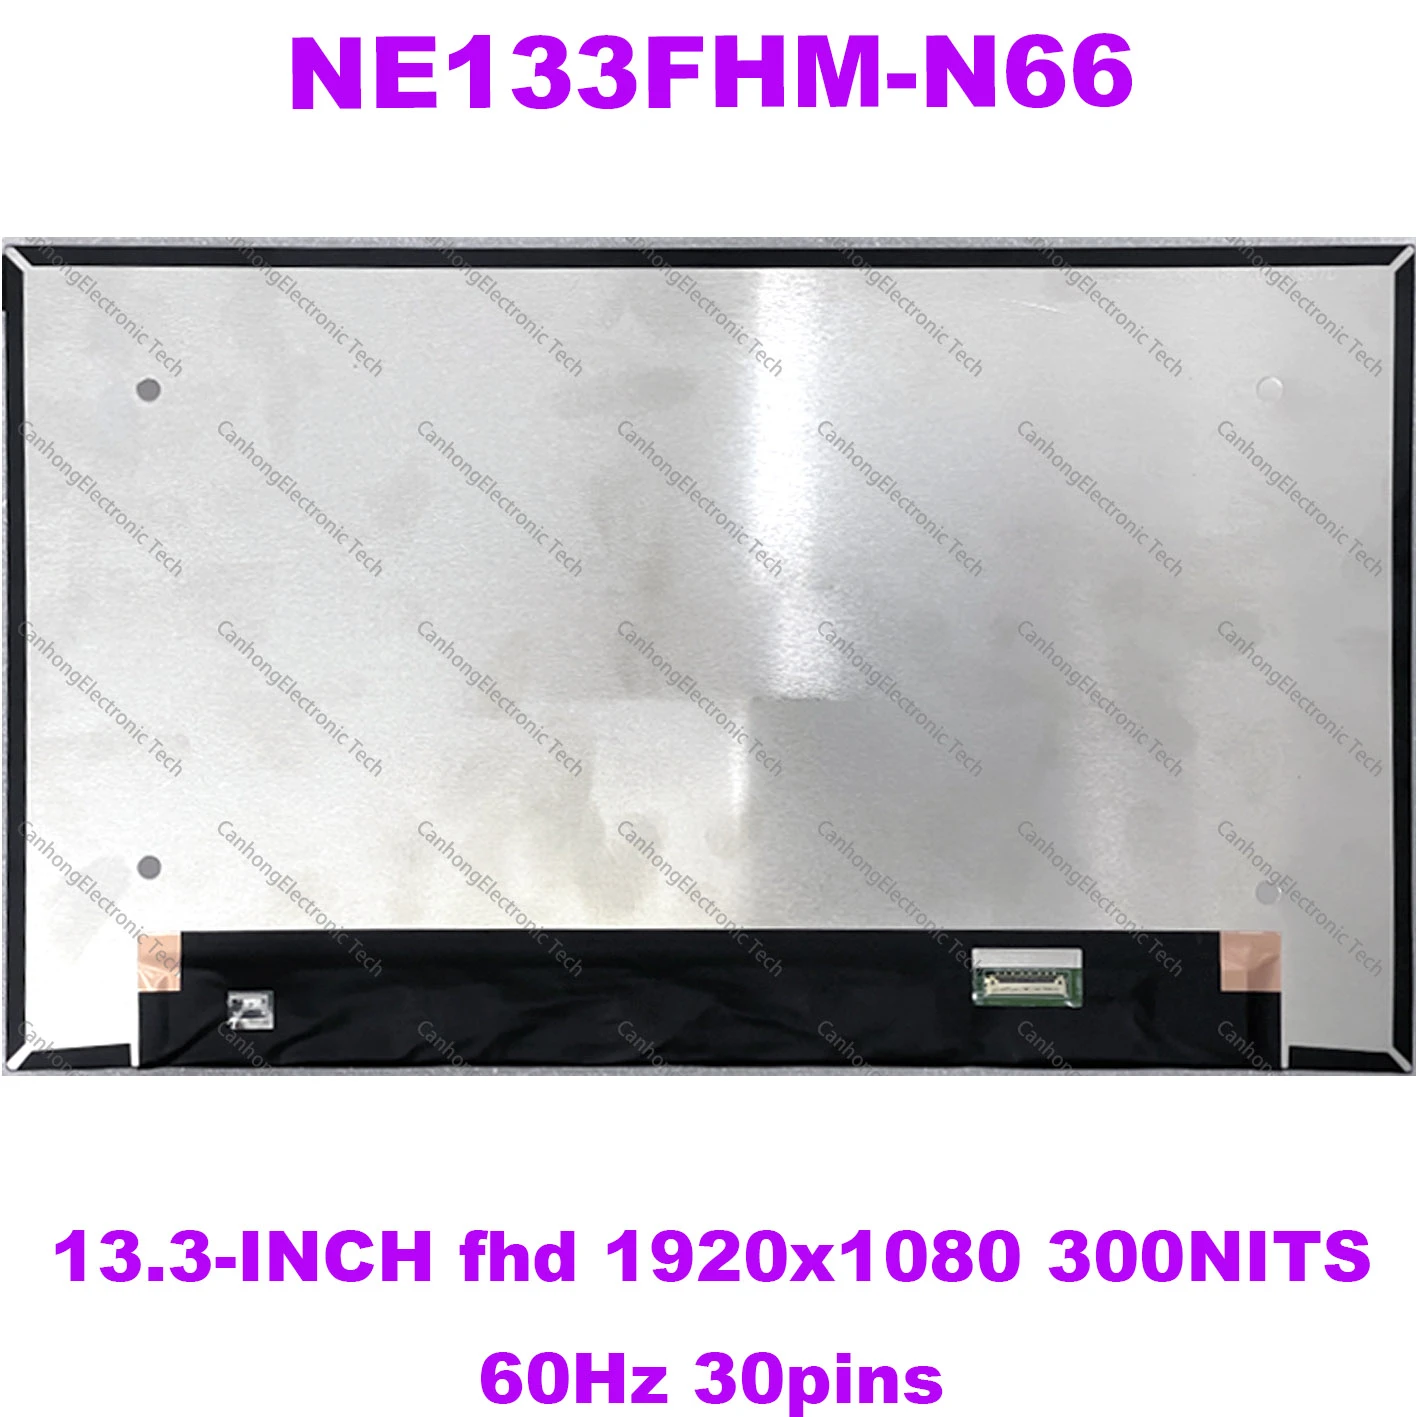  Inch Ne133fhm-n66 Lcd Non-touch Screen For Dell Latitude 7320 5320  Screen Replacement Display Panelfhd1920*1080 30pins 60hz - Laptop Lcd Screen  - AliExpress